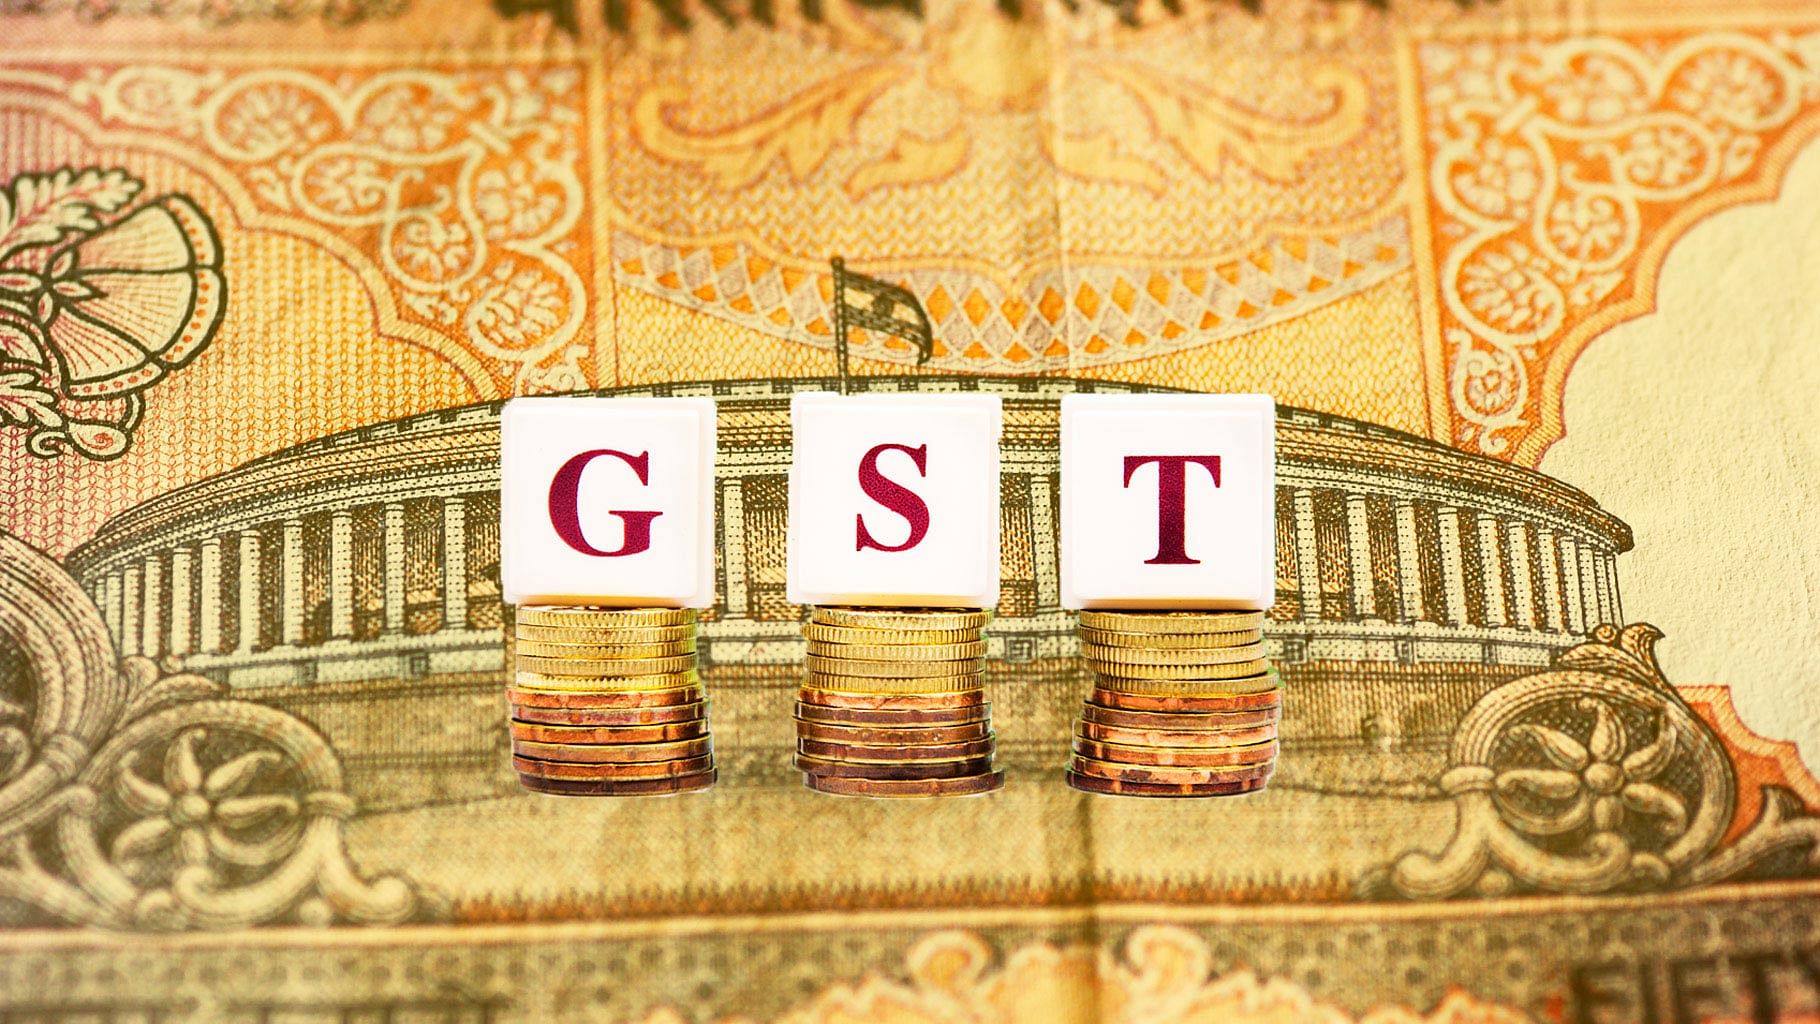 GST revenues crossed Rs 1 lakh crore in April on improved compliance.